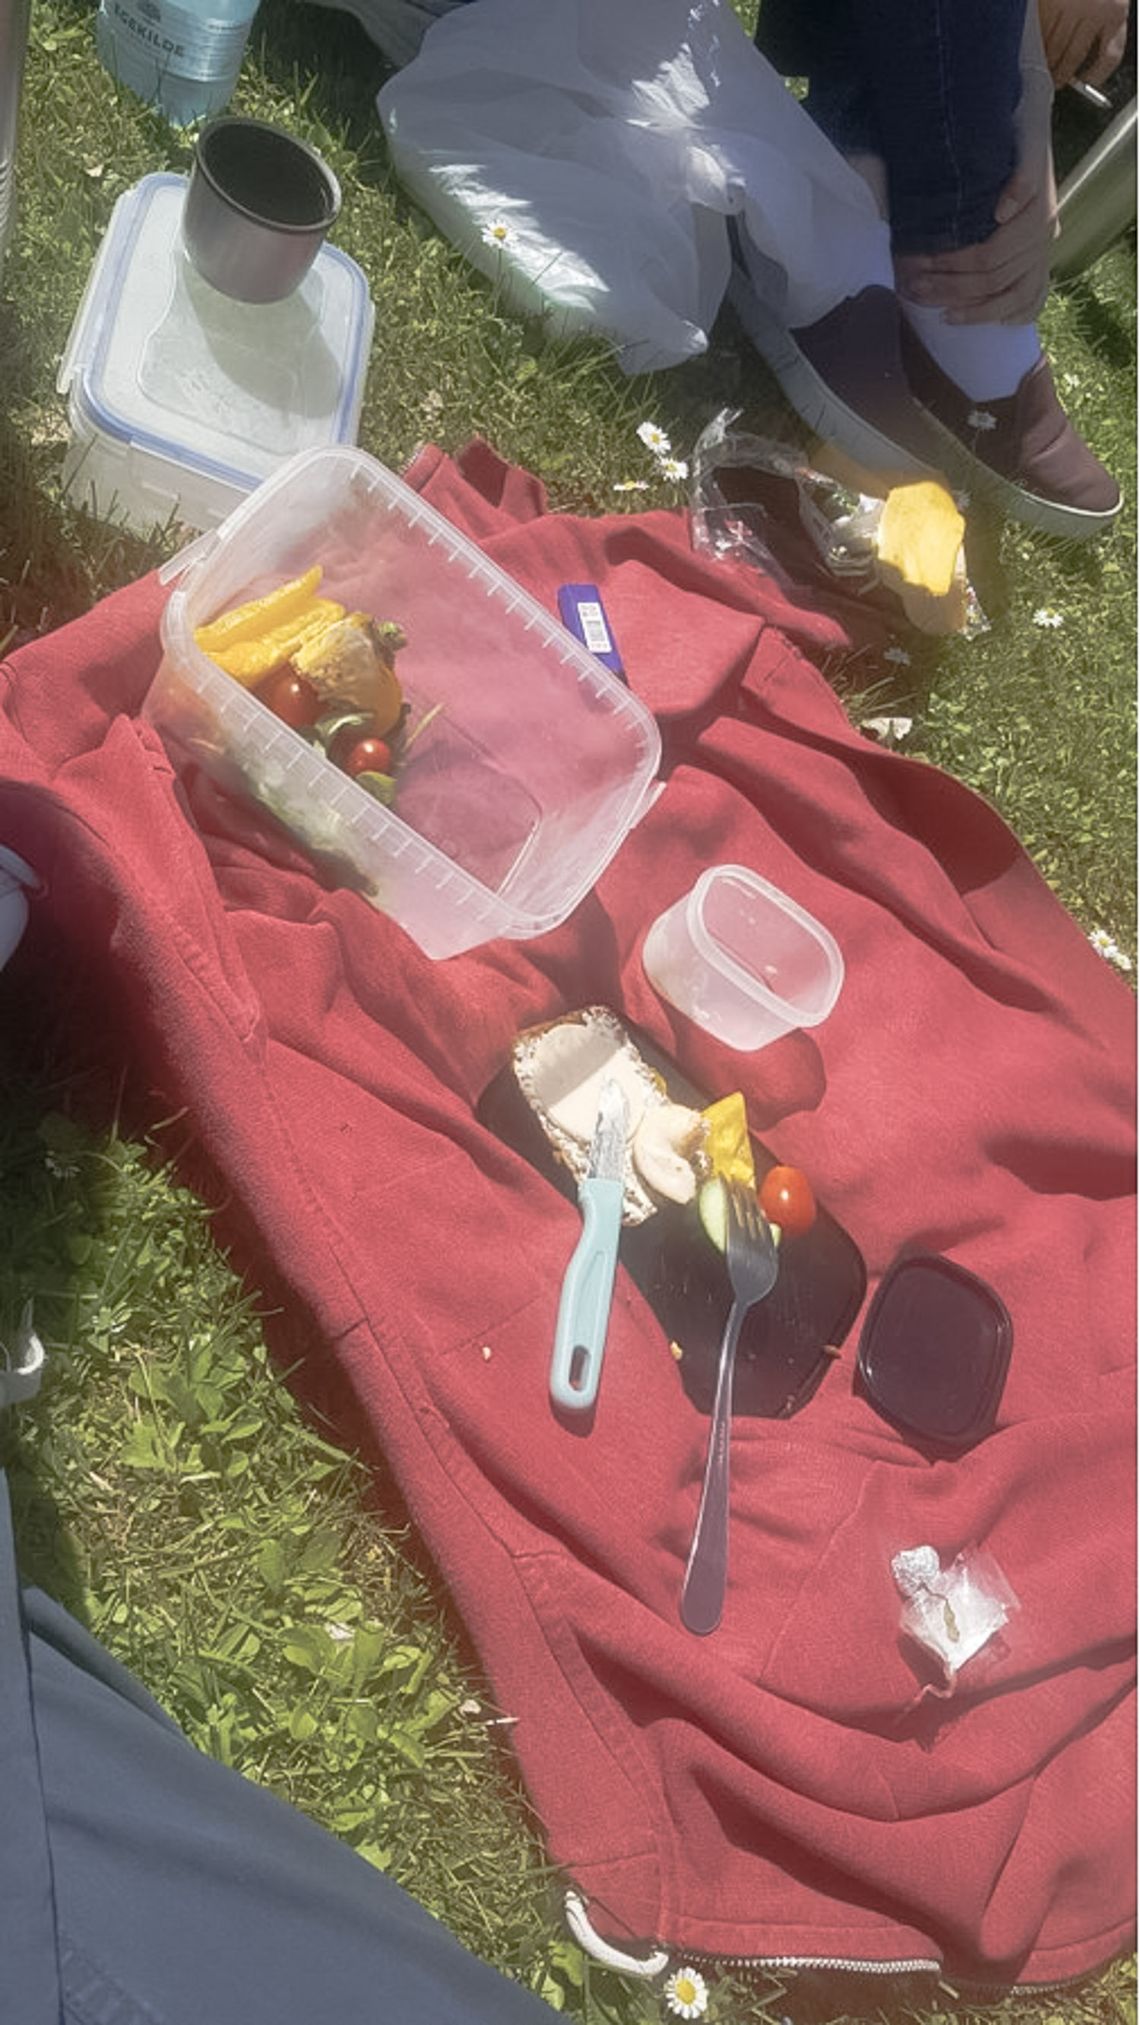 A red blanket on grass with tupperware with food on it.